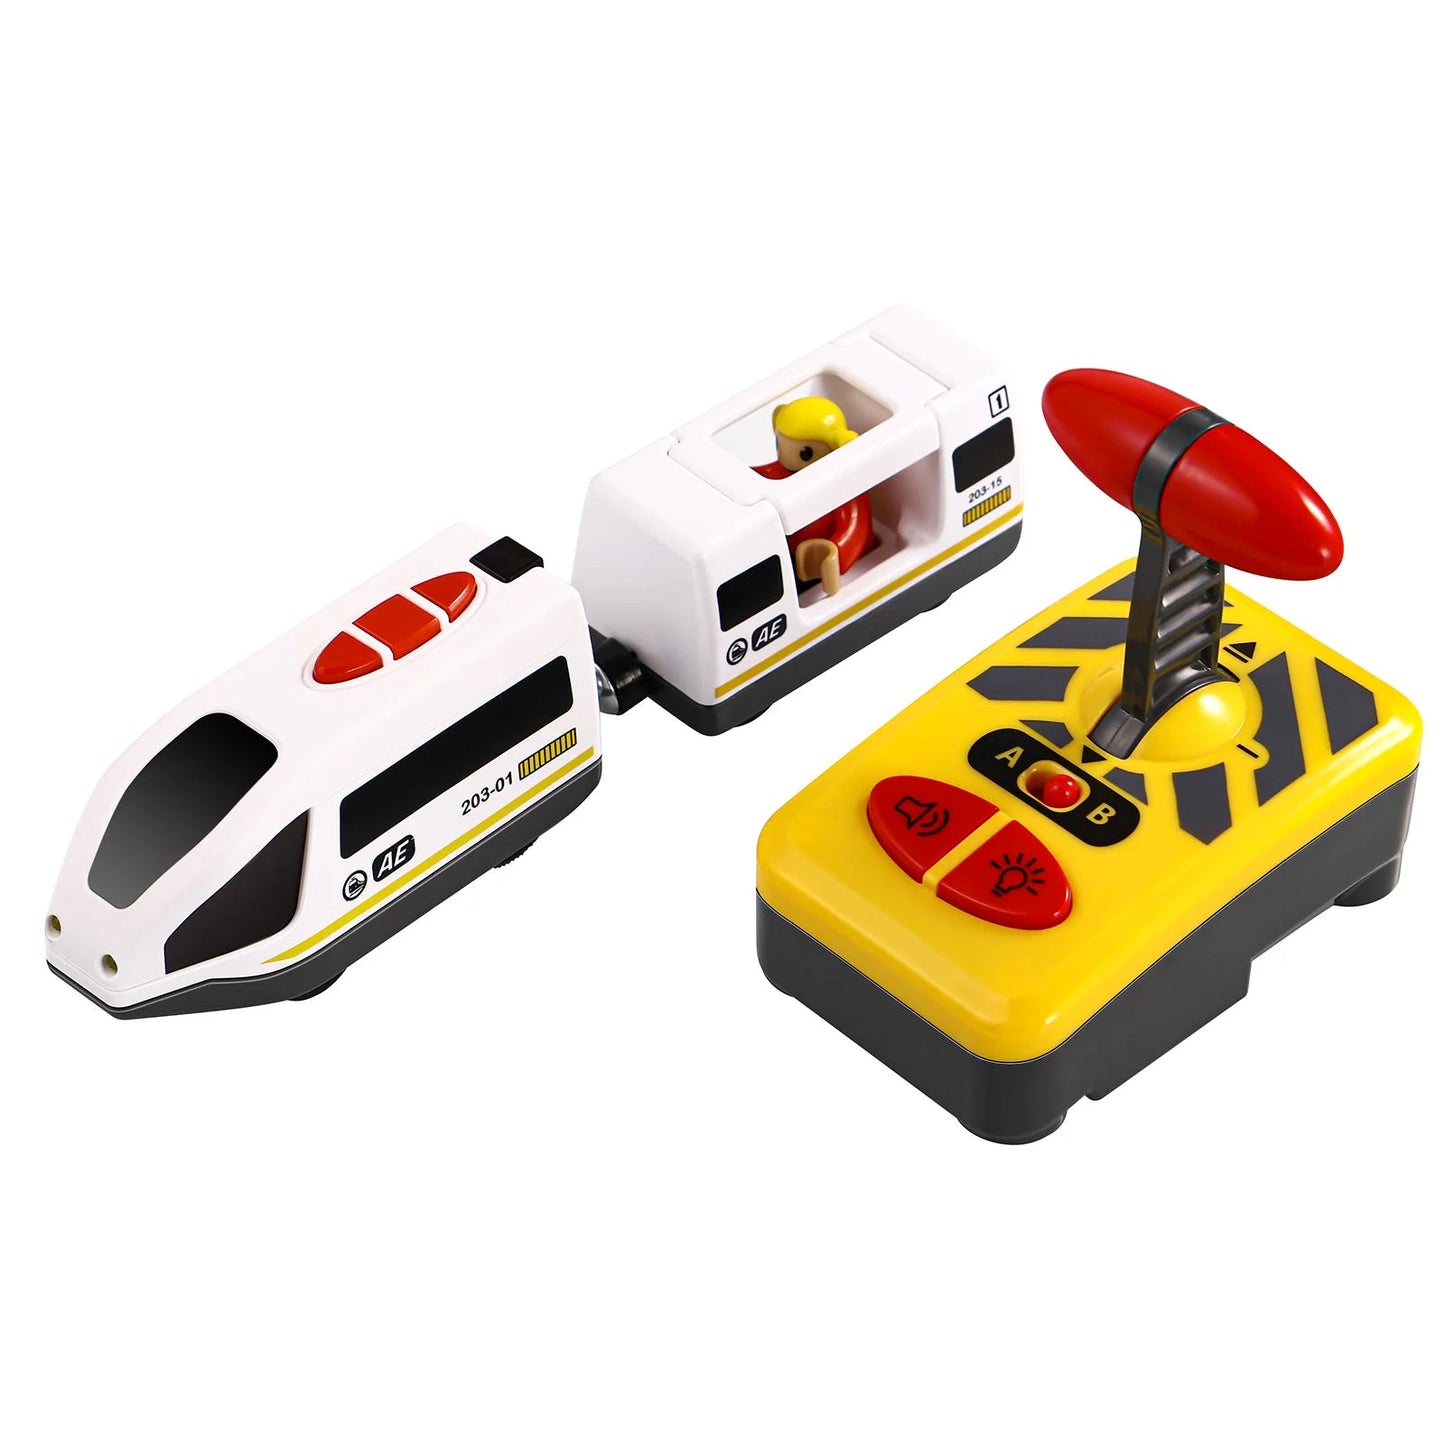 STOBOK Funny RC Electric Train Model Toy for Children